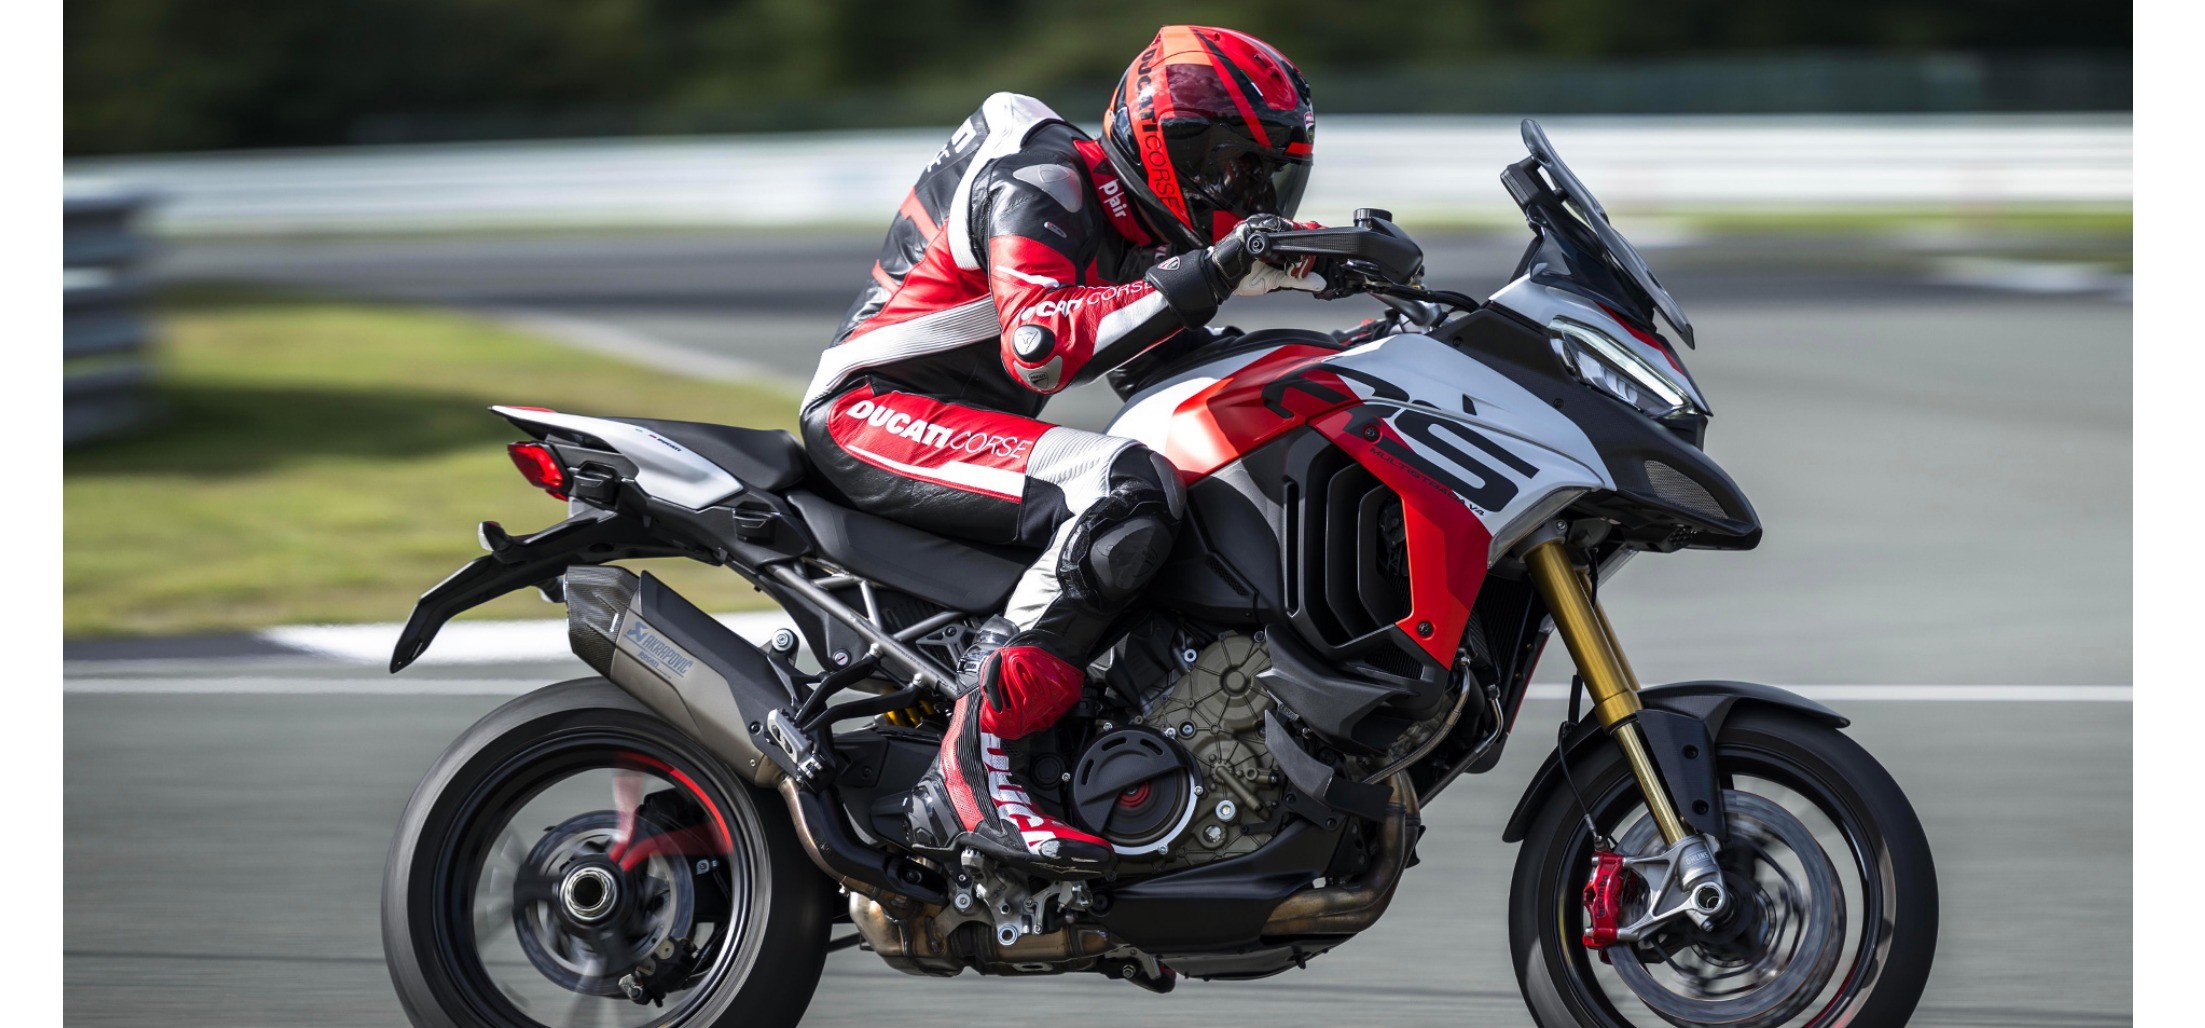 Ducati stabilises its position in the main markets thanks to a range of sophisticated, highly technological and uniquely designed products